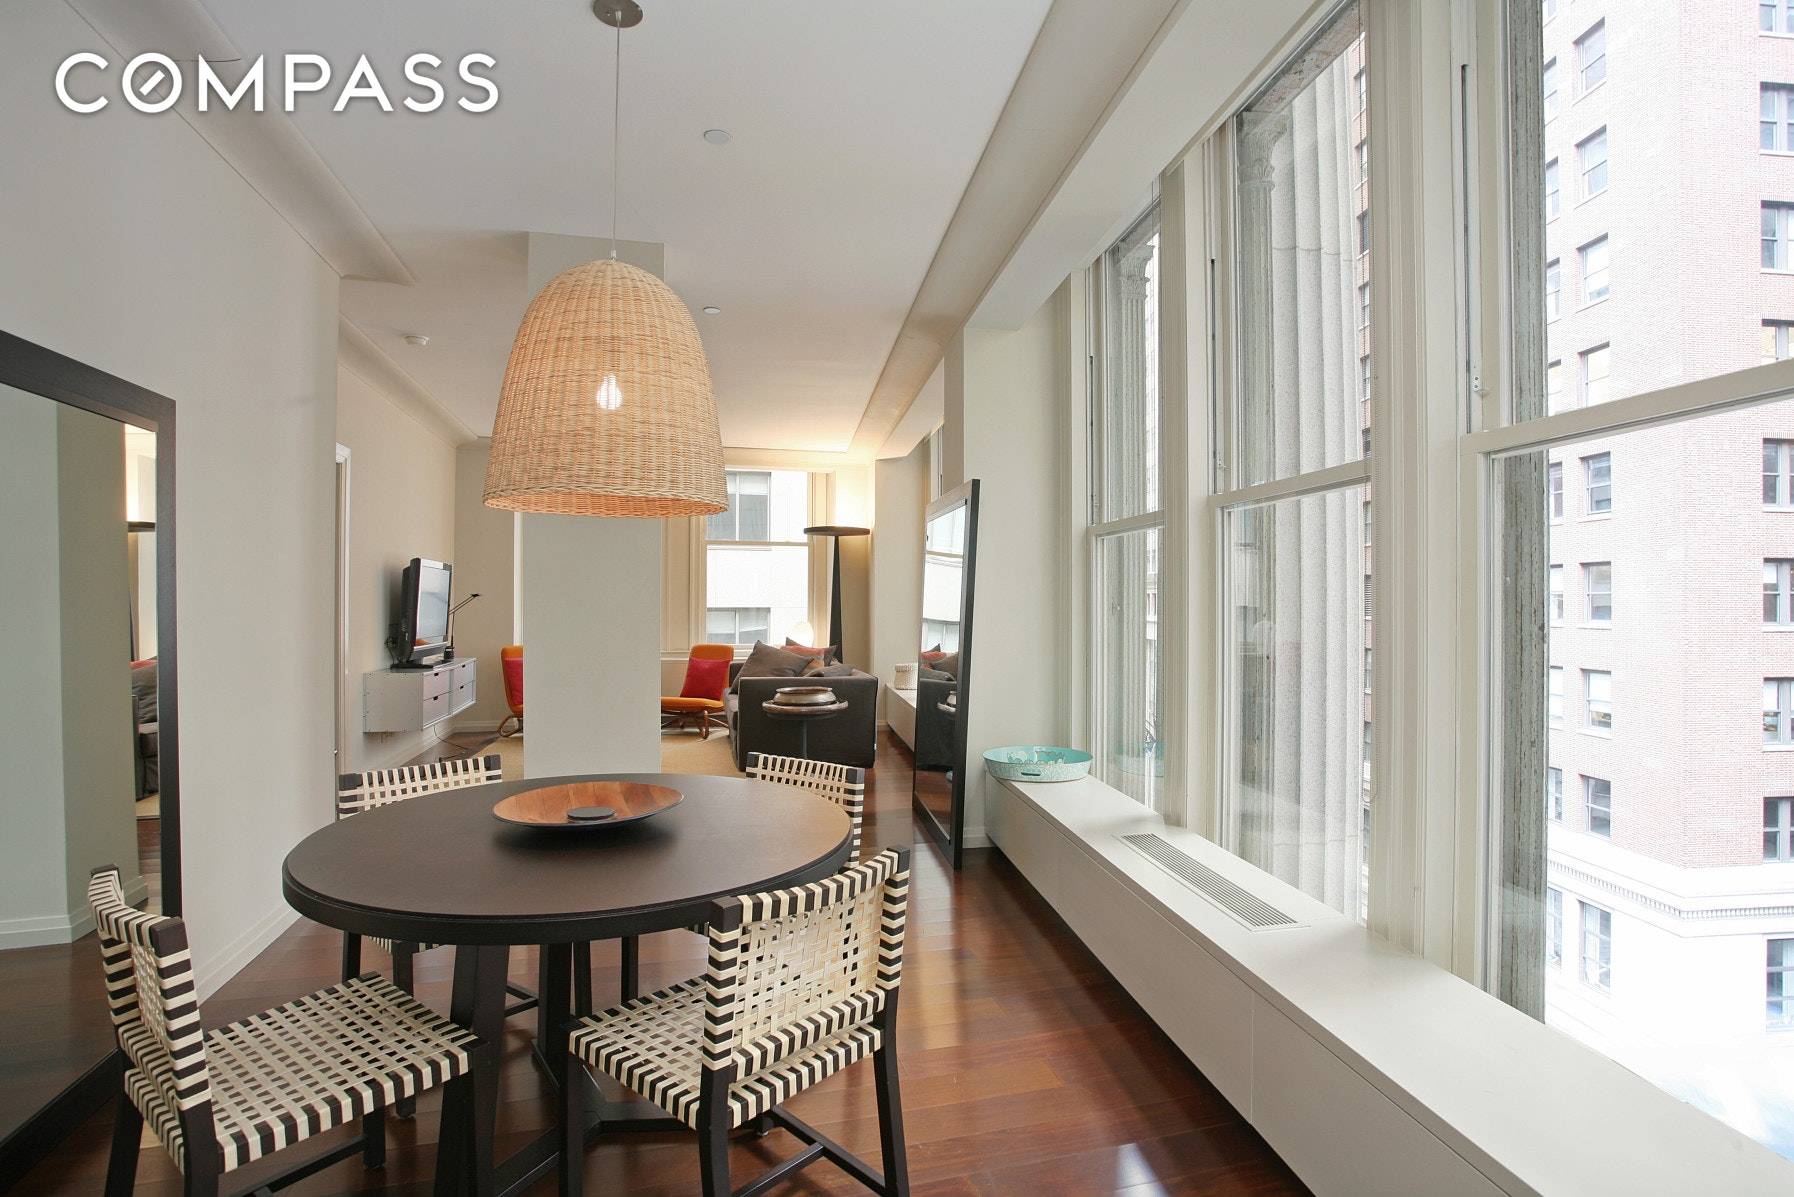 Ultra rare Wall Street facing corner 1 bedroom, offered at an outstanding price.